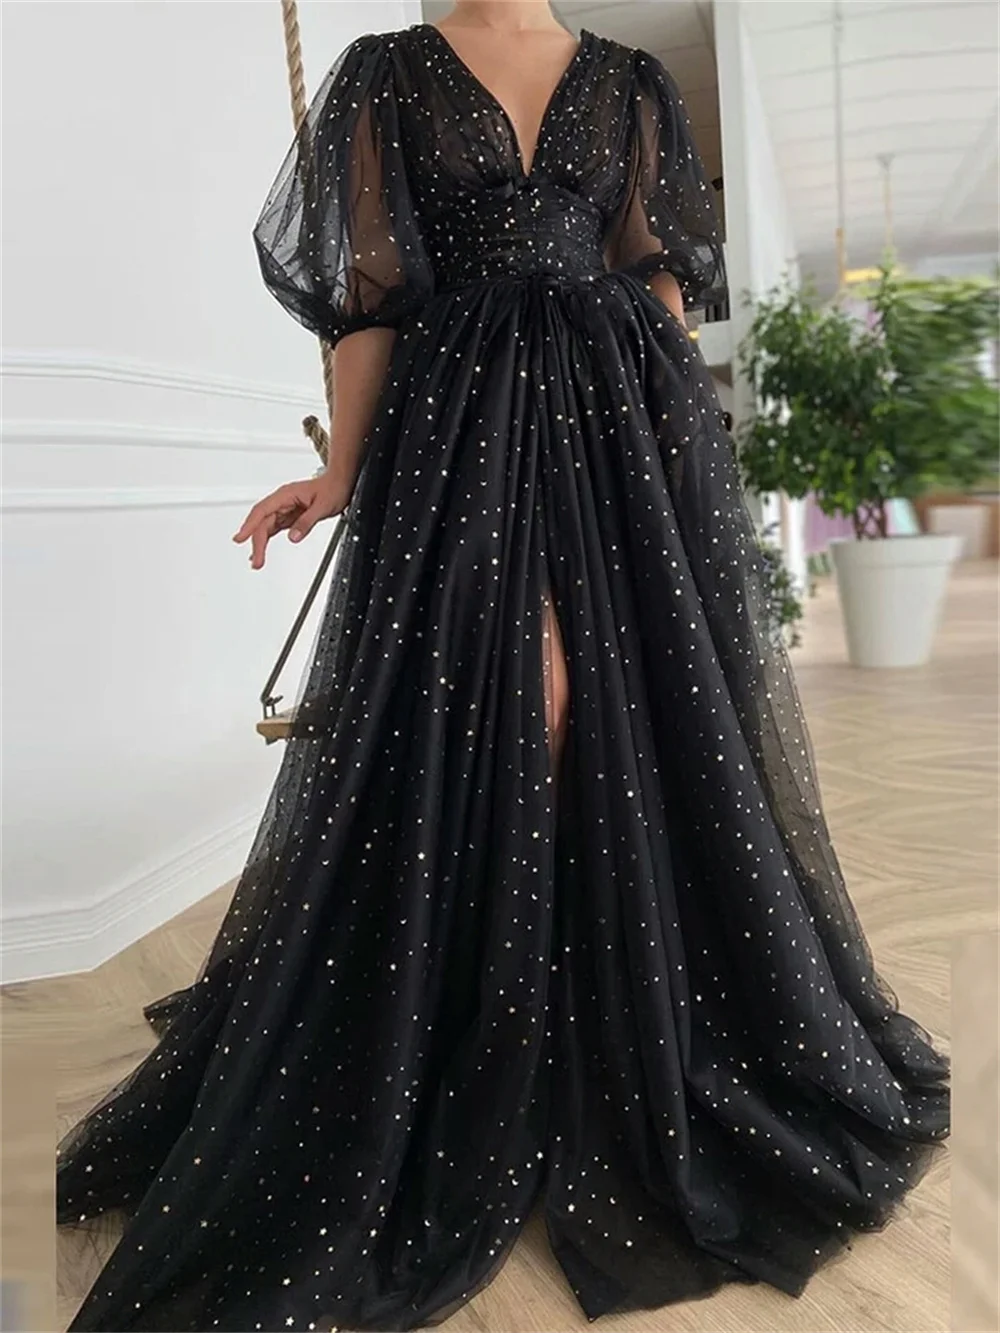 

Black Starry Tulle Prom Dresses Half Puff Sleeves Wedding Party Dresses Pleats Split Sweep Train Long Evening Gowns Belt